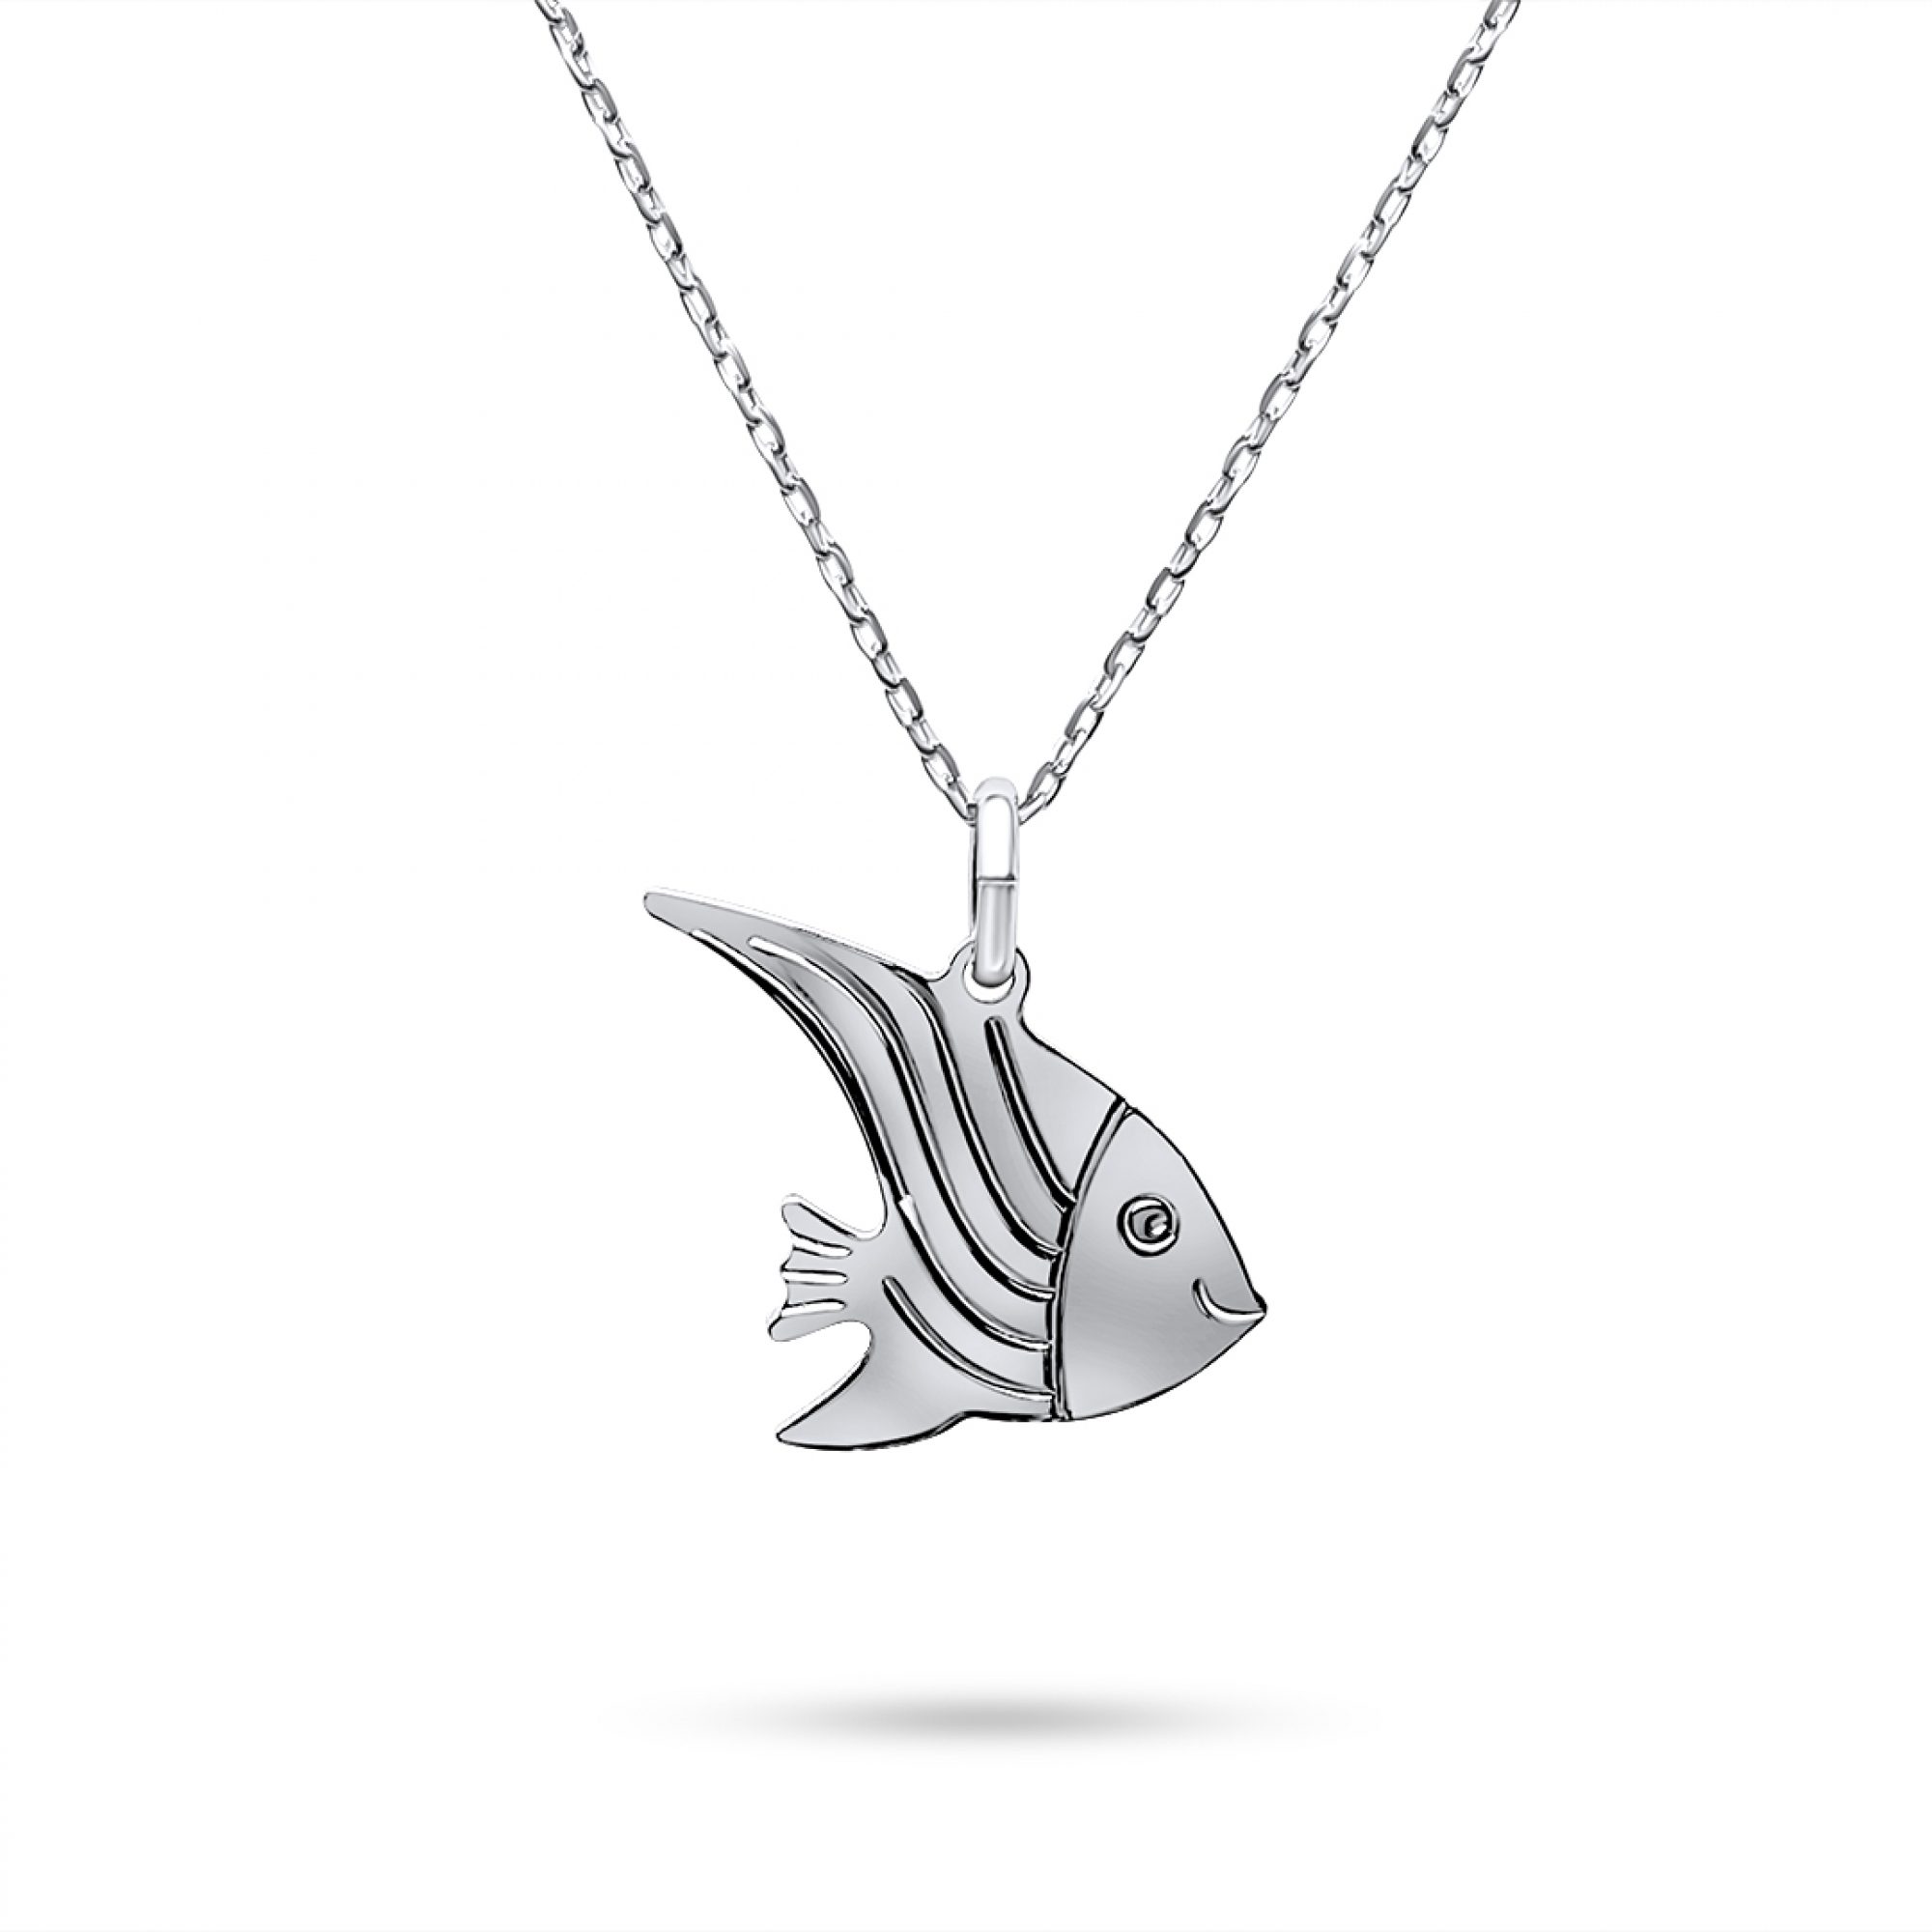 Fish necklace